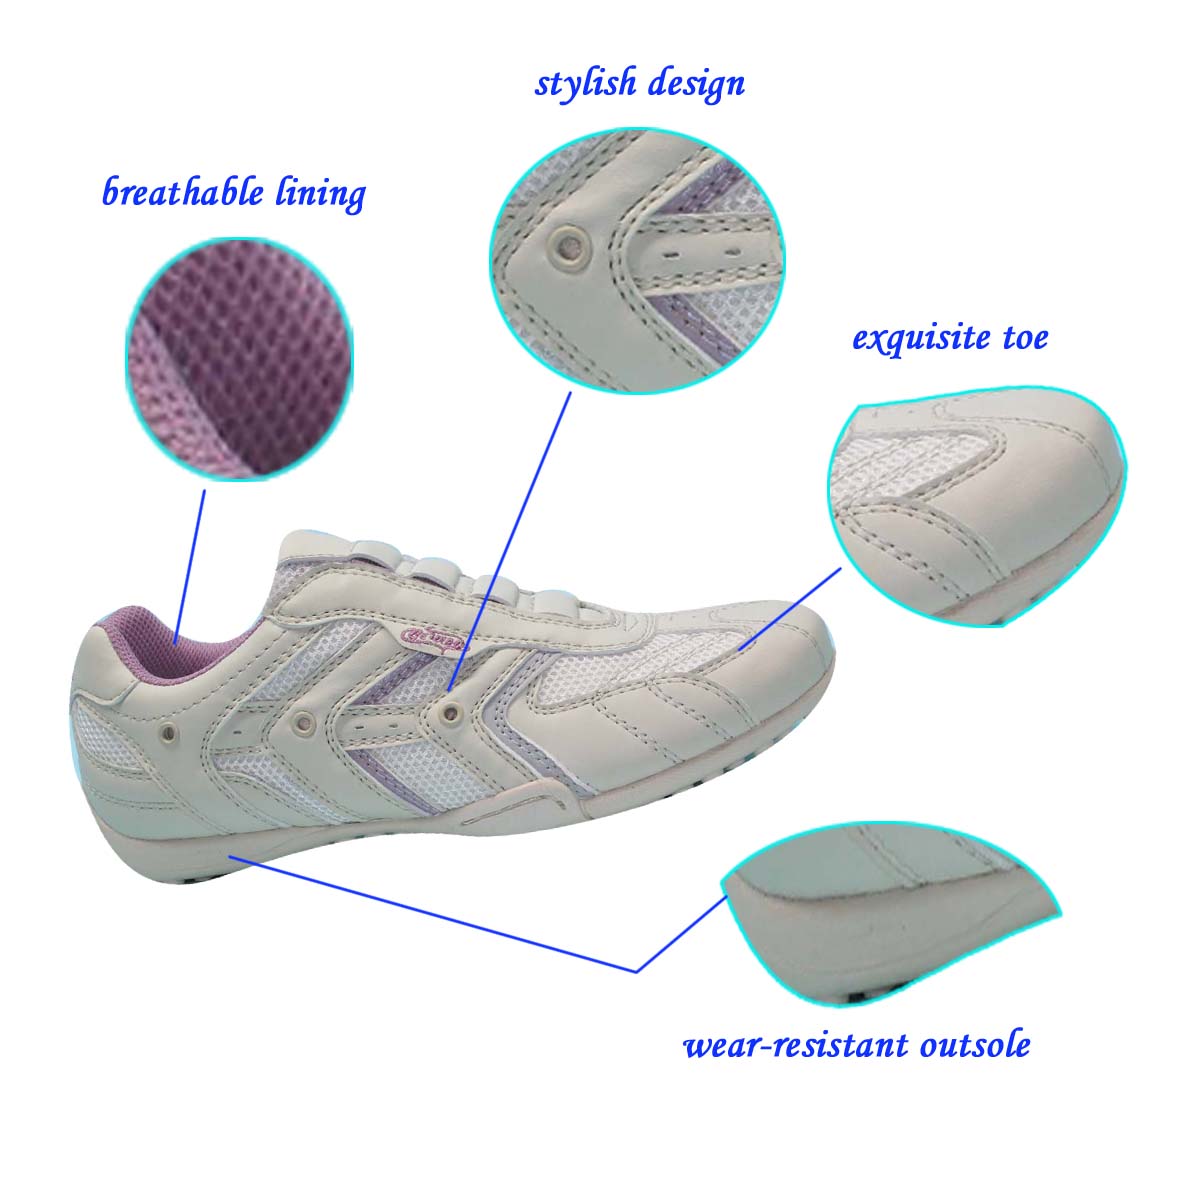 New Products Small Woman slip-on Casual Shoe of Top Quality from China Market with PU Mesh Upper and Rubber Outsole